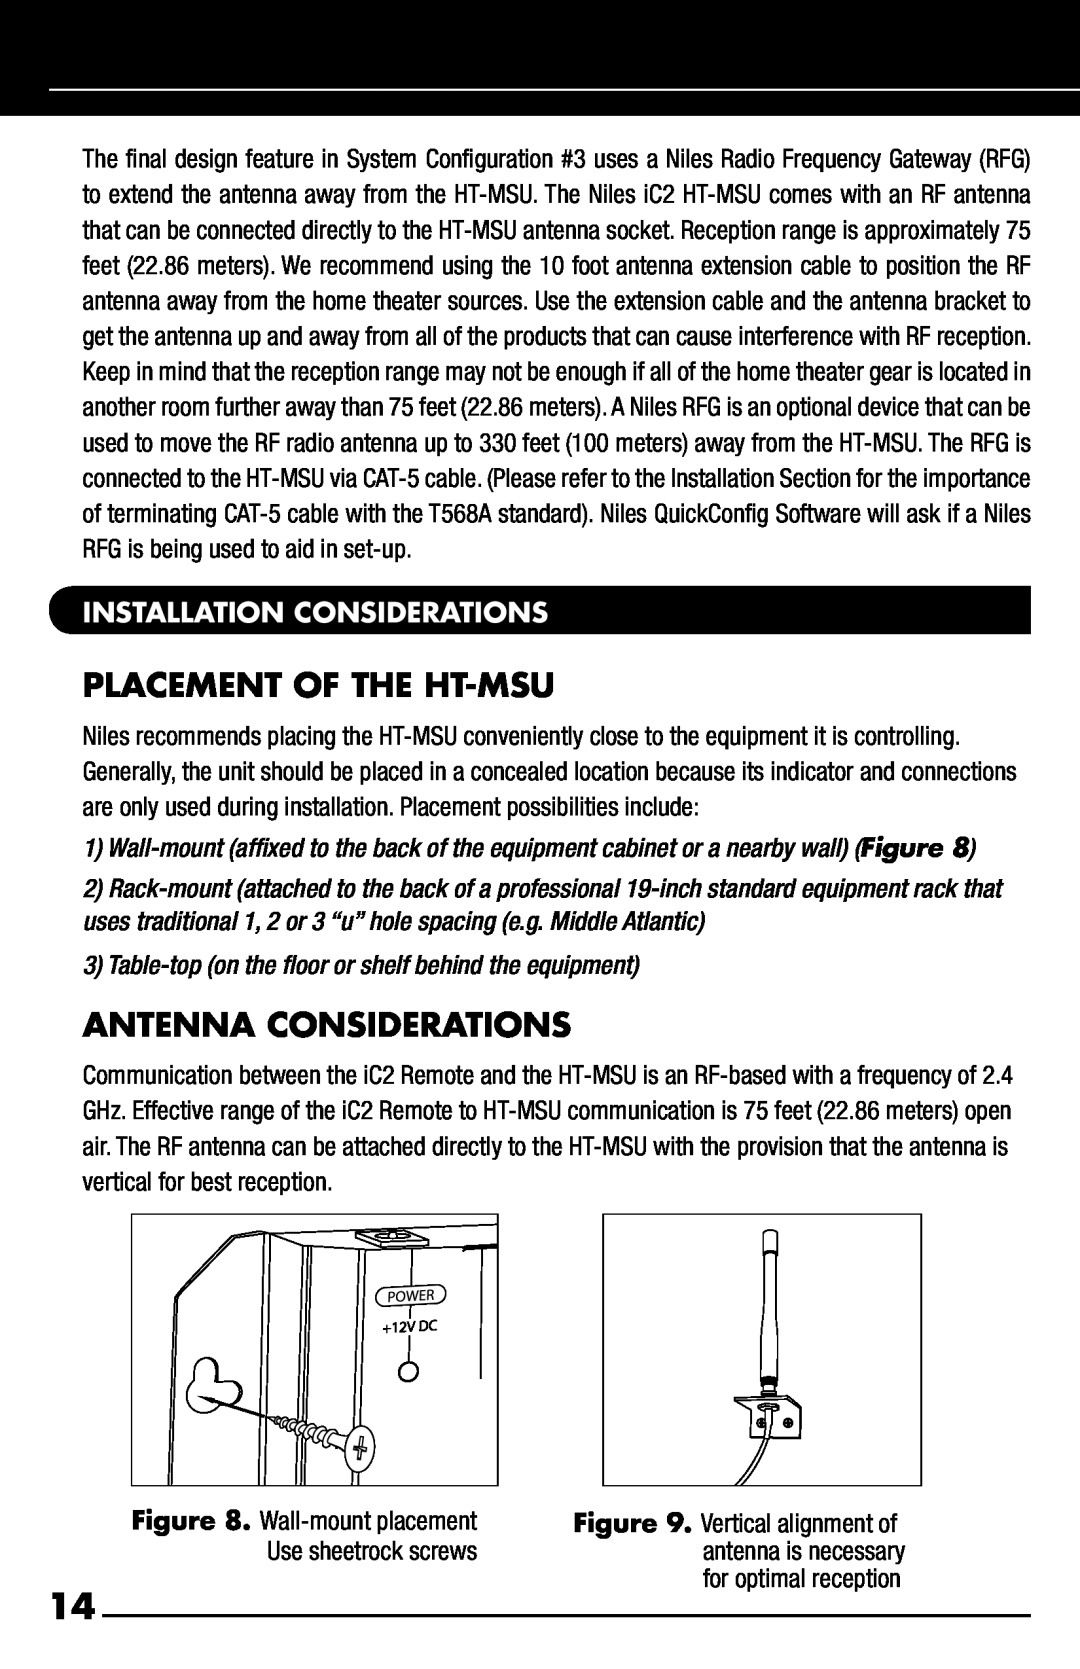 Niles Audio iC2 manual Placement Of The Ht-Msu, Antenna Considerations, Installation Considerations 